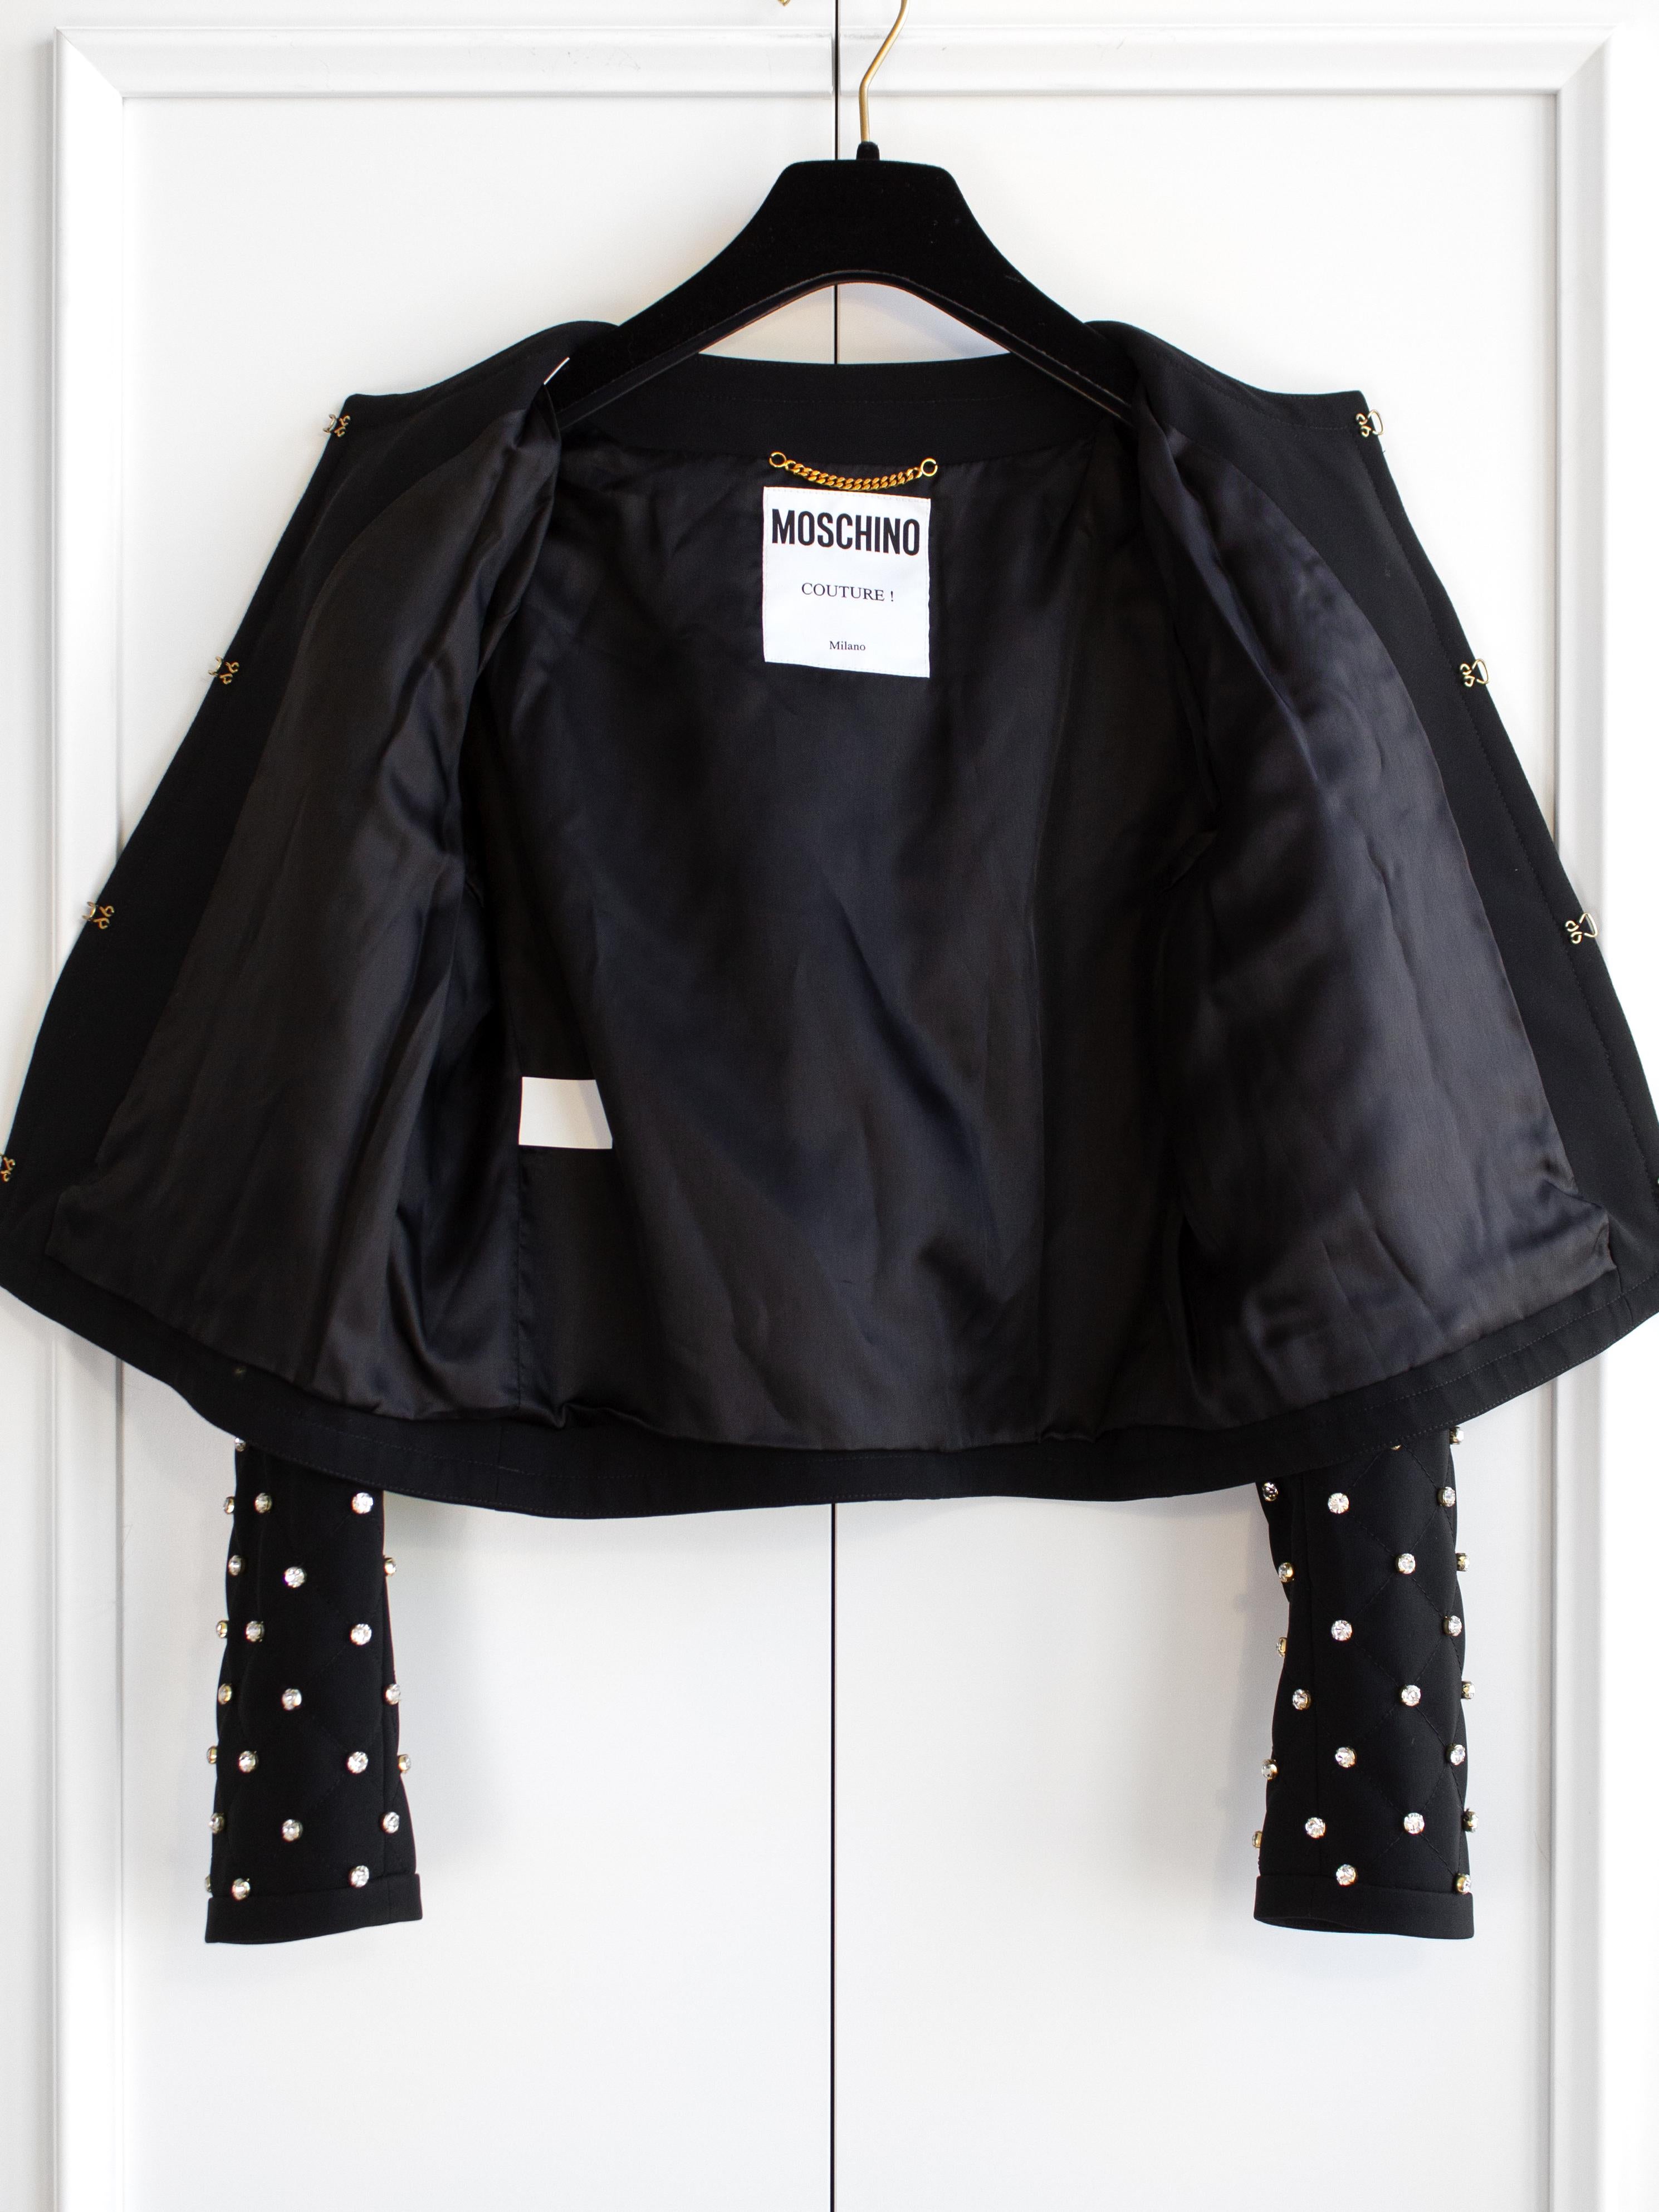 Moschino Couture S/S 2015 Barbie Crystal Embellished Rhinestone Black Jacket For Sale 9